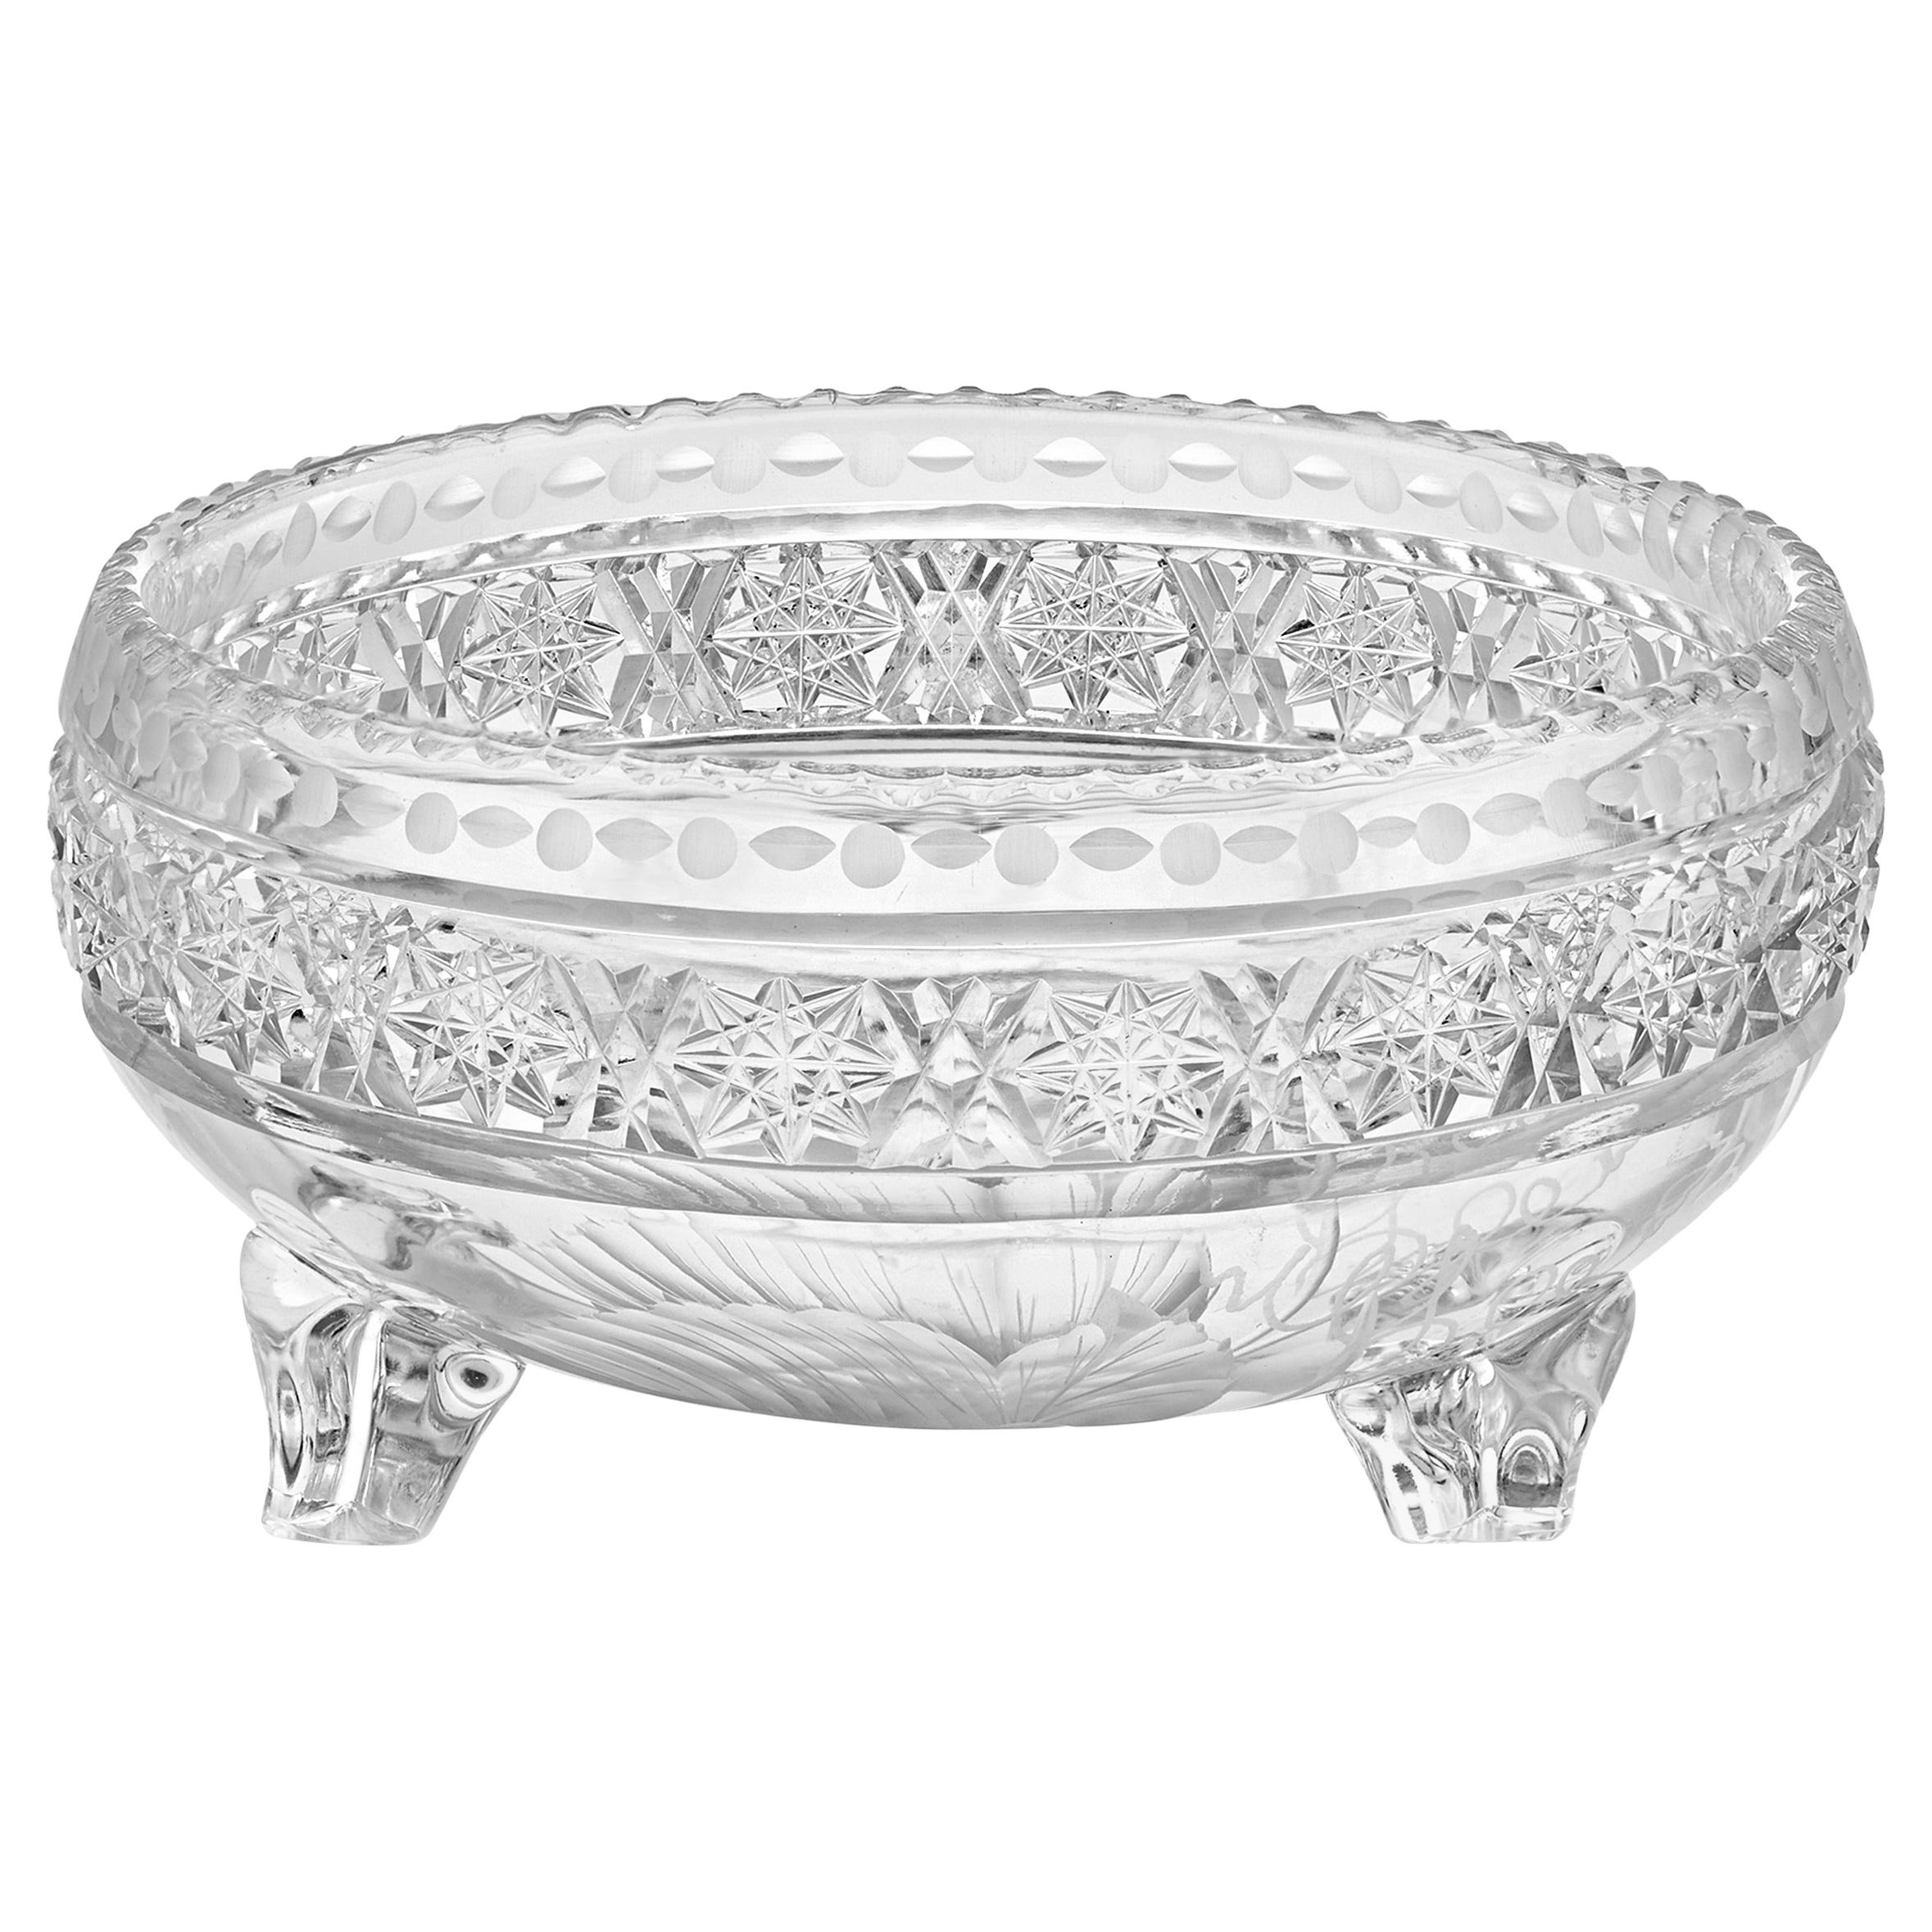 Tuthill Vintage Pattern Footed Bowl